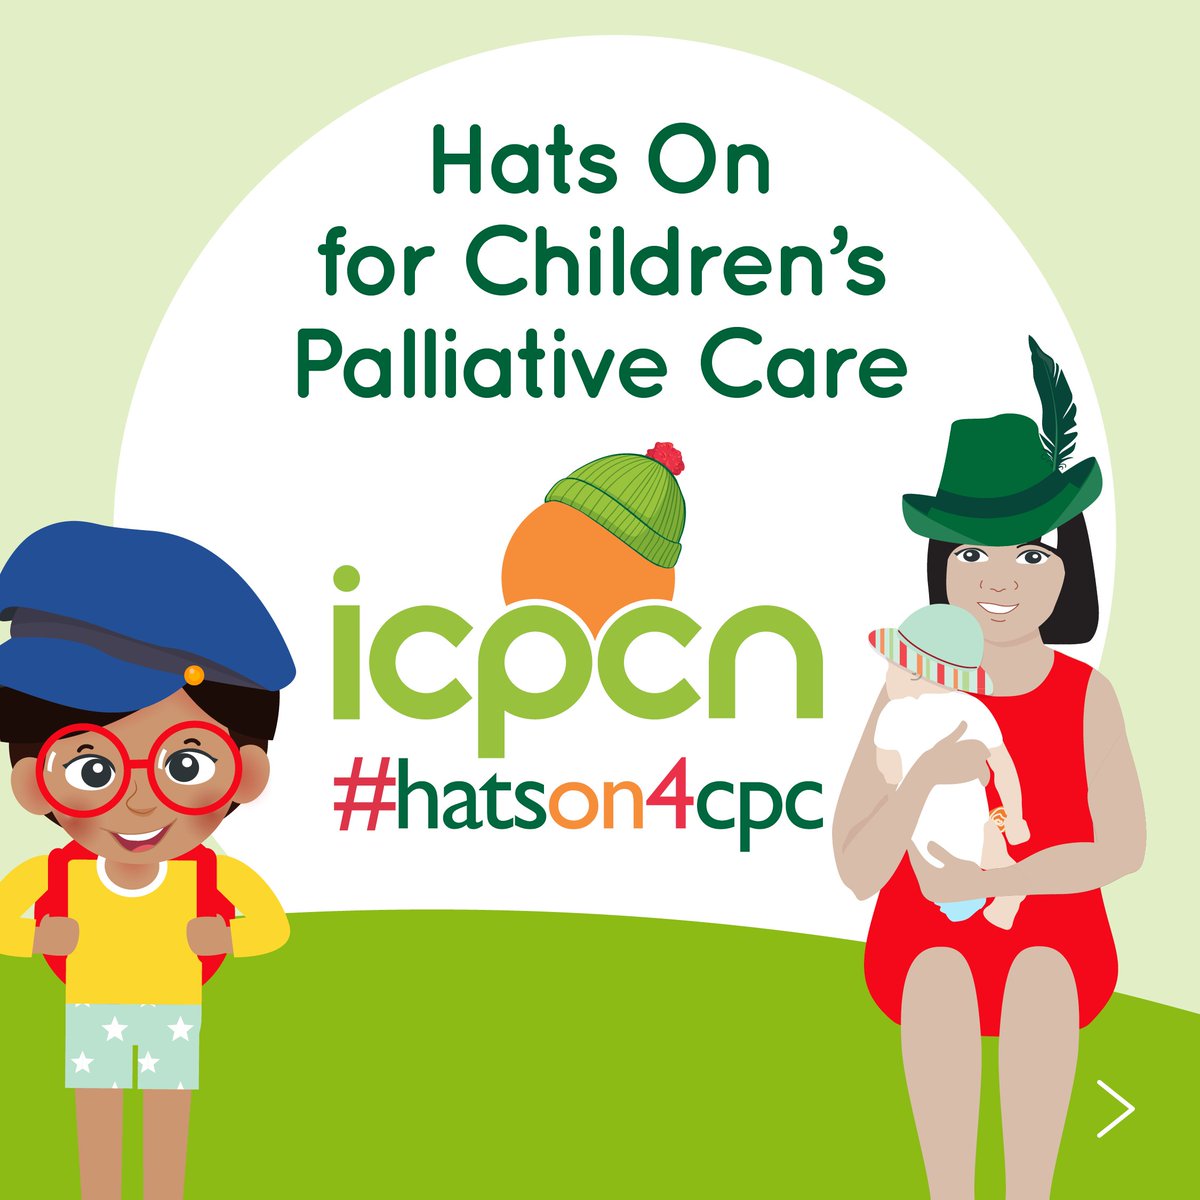 The handful of services that exist in low income settings are underfunded and inadequate to meet the overwhelming need. Millions of children have a poor quality of life and suffer from distressing symptoms which could be improved with quality palliative care services #HatsOn4CPC